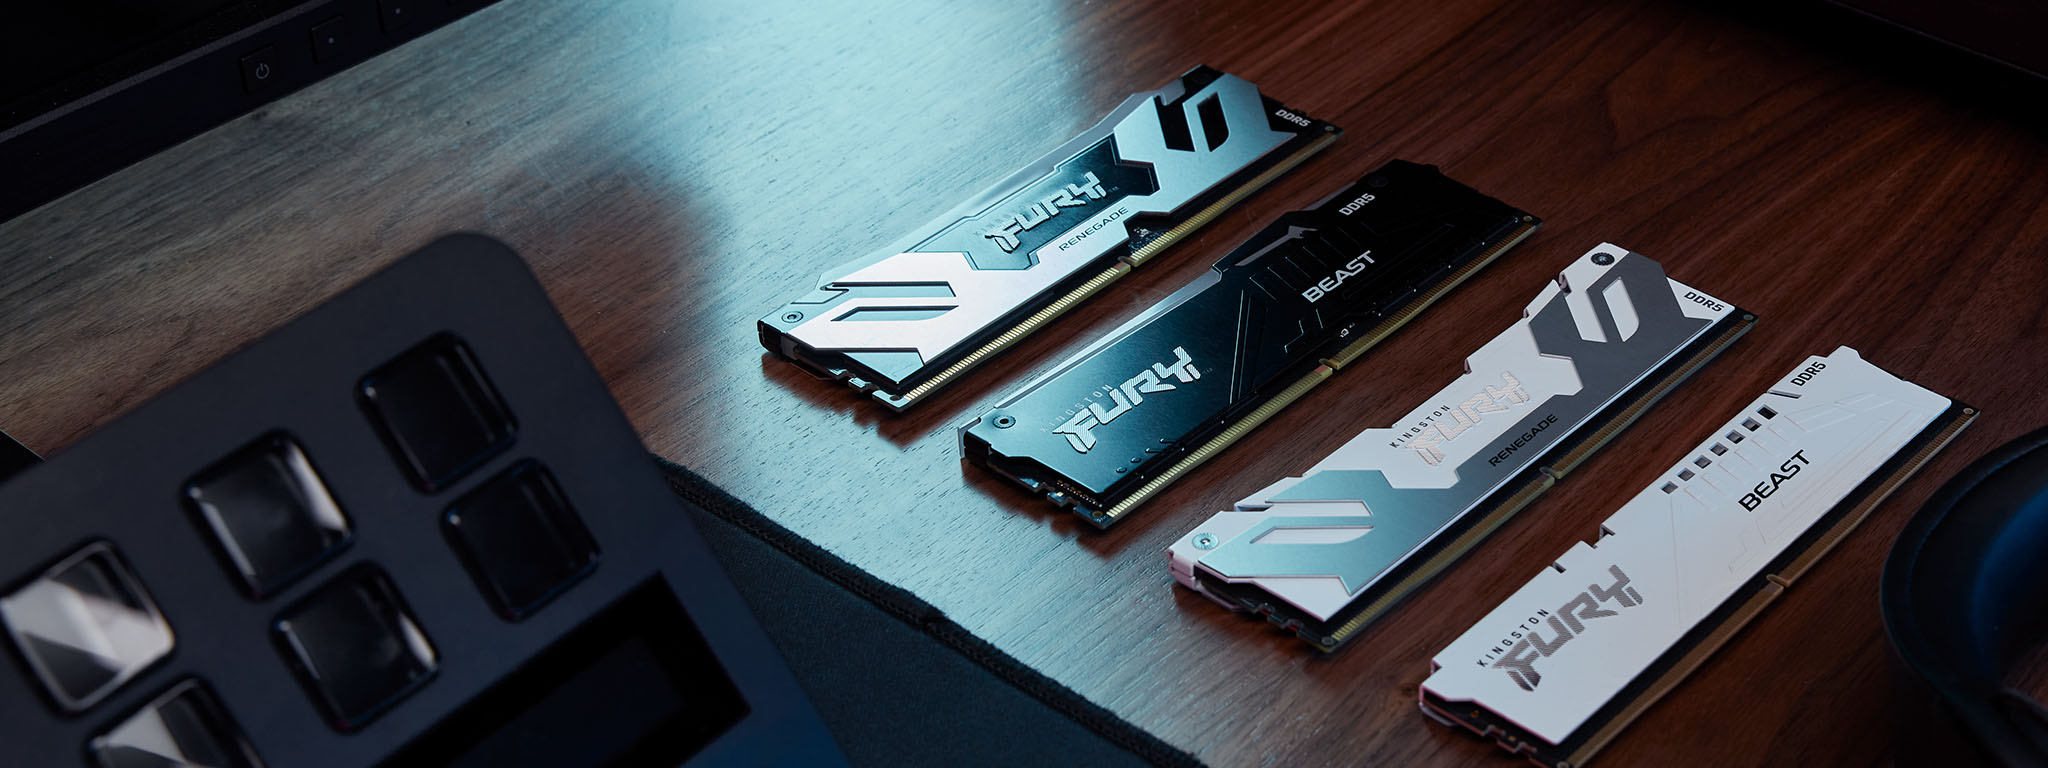 The latest motherboards are ready for Kingston FURY DDR5 memory